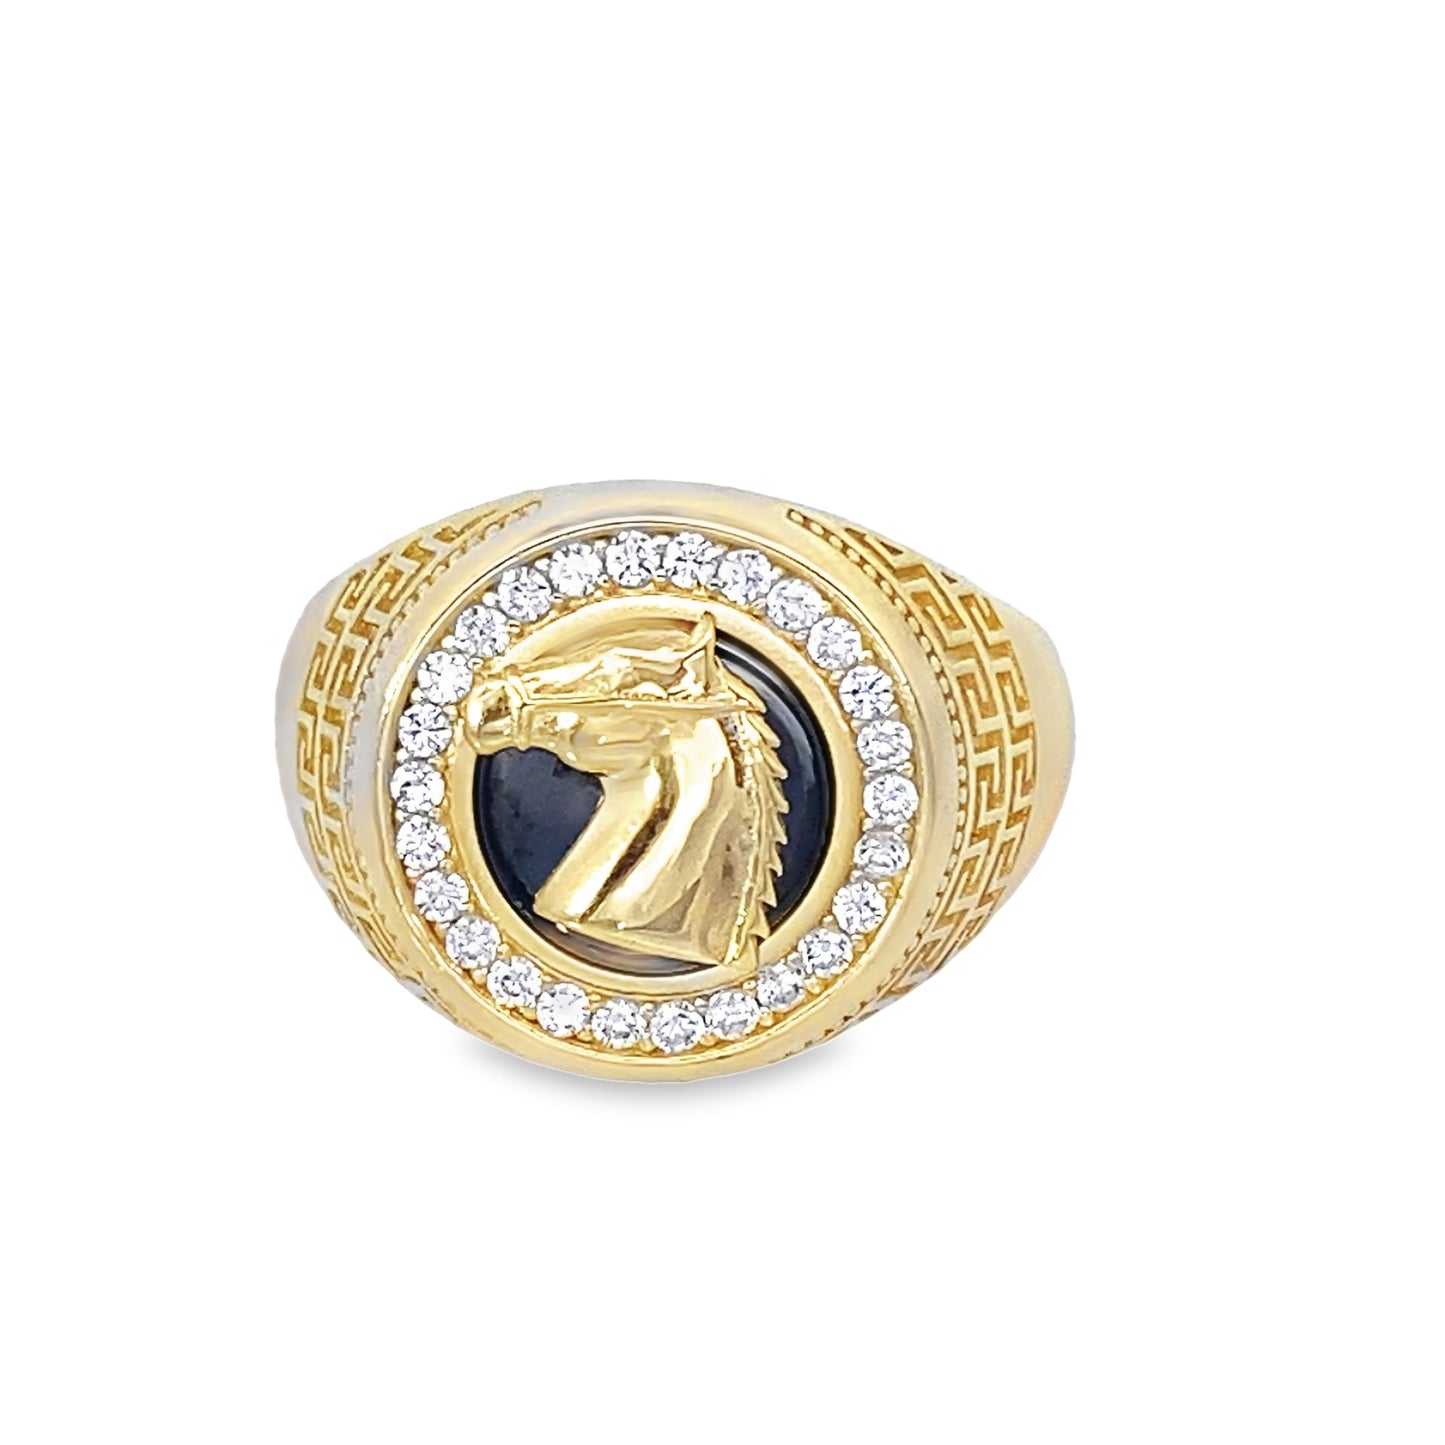 14K Yellow Gold Cz & Horse Style Ring Size 11 4.9Dwt